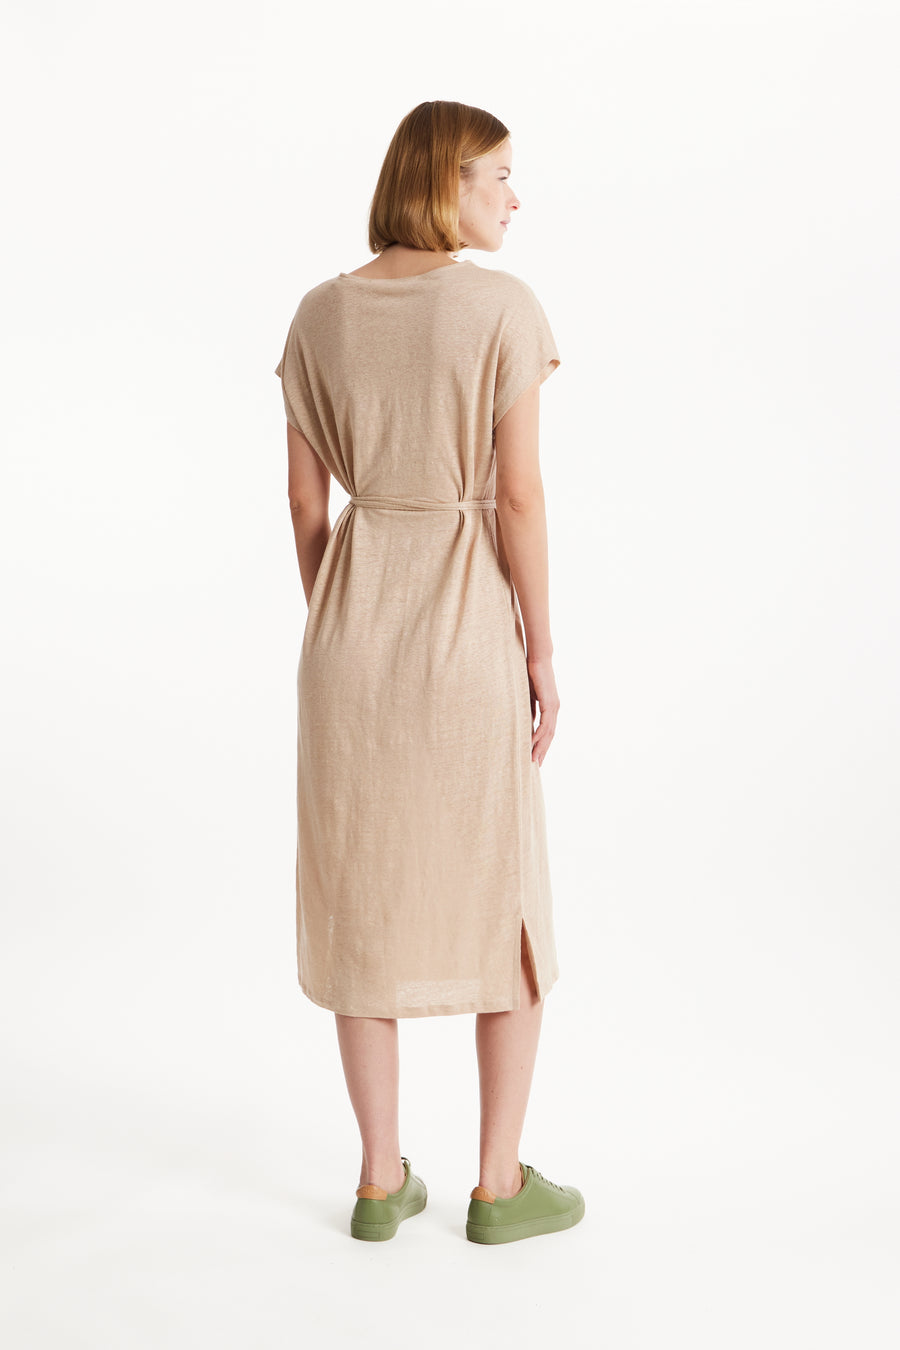 People Tree Fair Trade, Ethical & Sustainable Silvia Linen Dress in Sand 100% organic certified linen